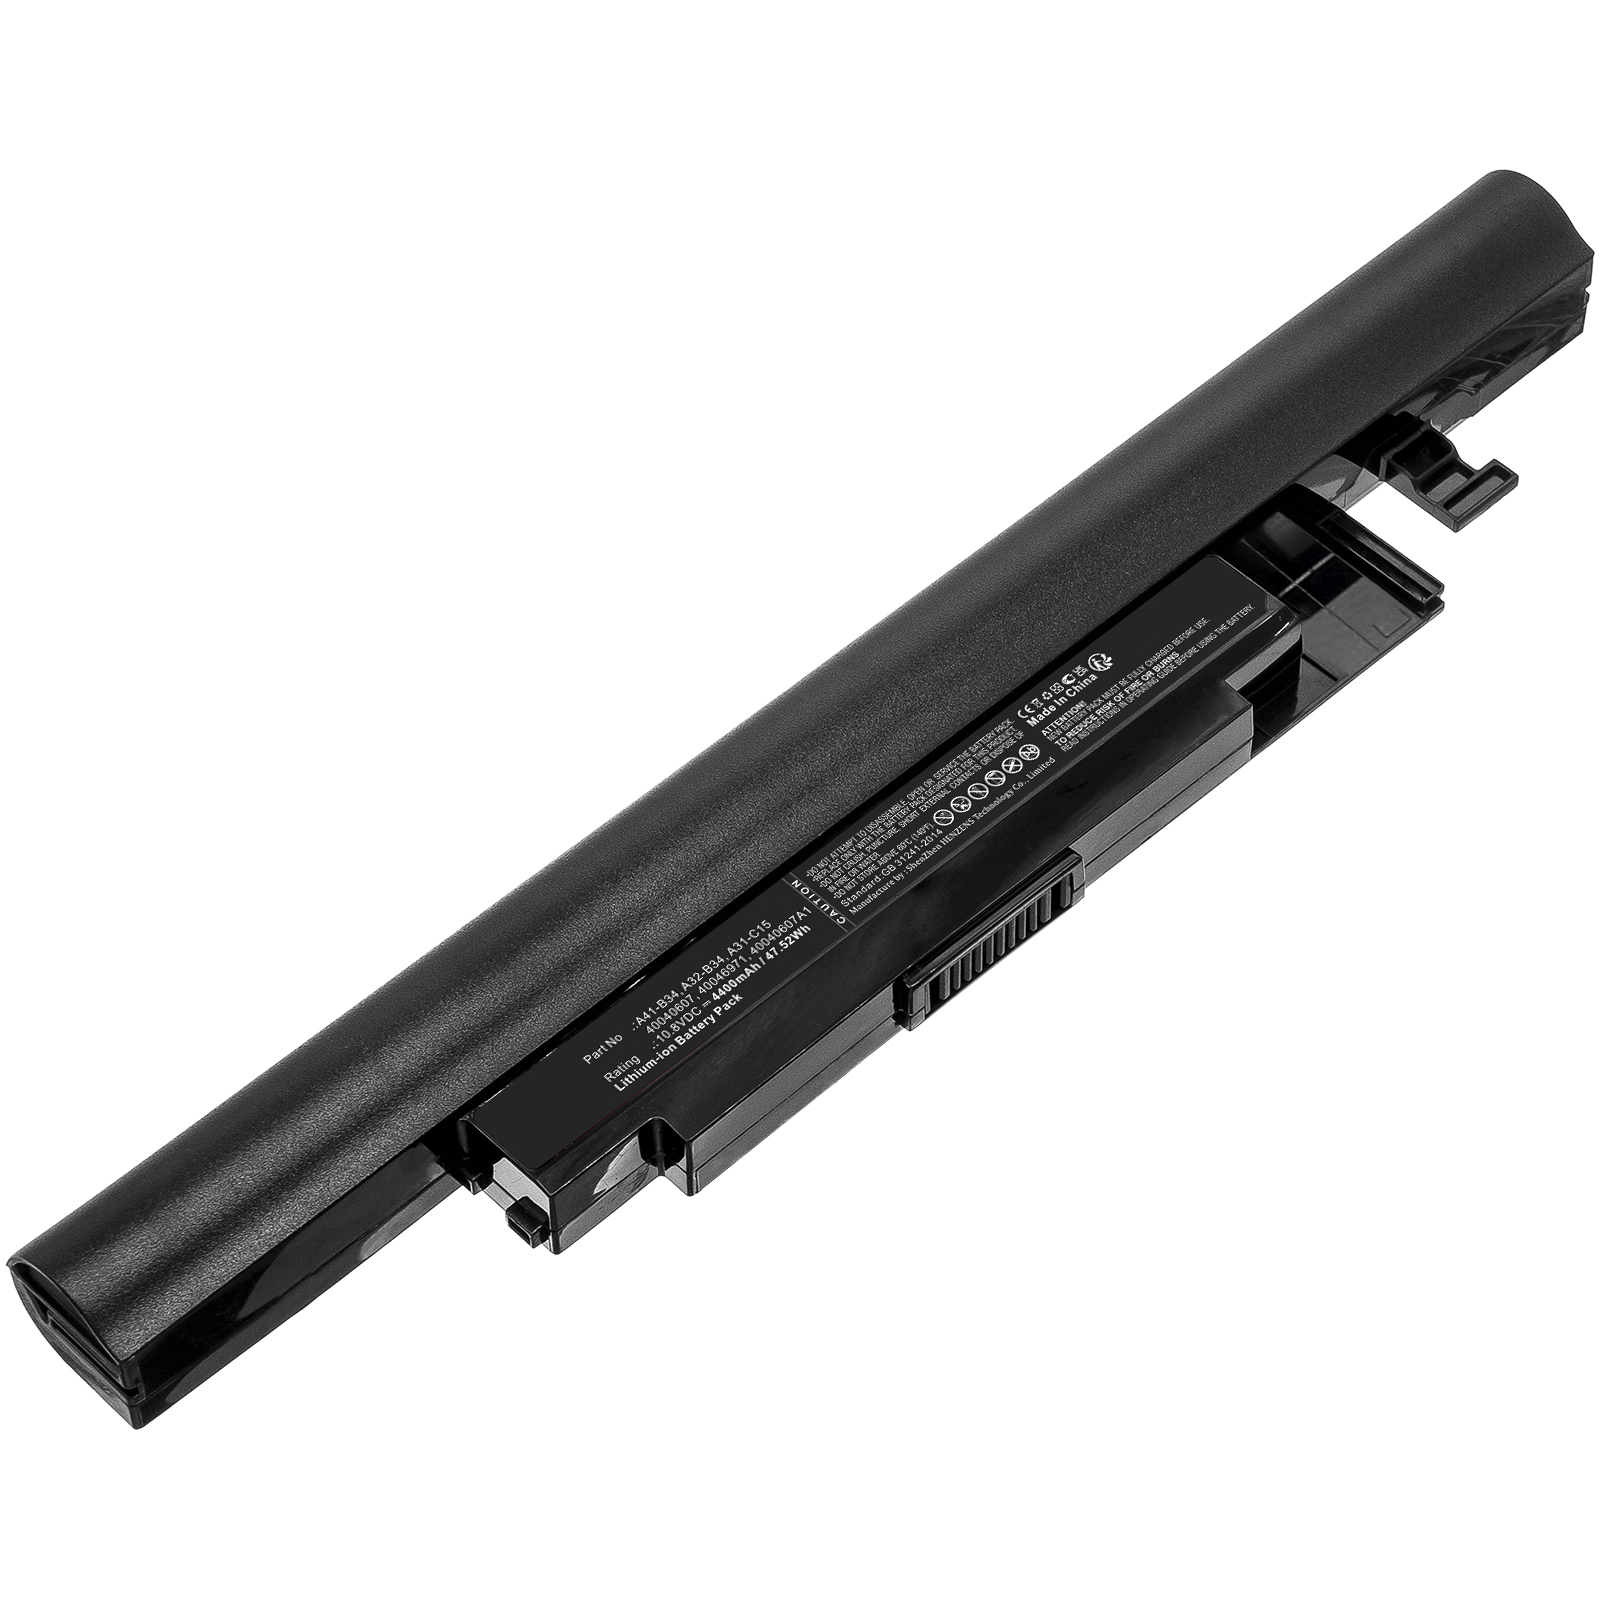 Synergy Digital Laptop Battery, Compatible with Medion A31-C15 Laptop Battery (Li-ion, 10.8V, 4400mAh)